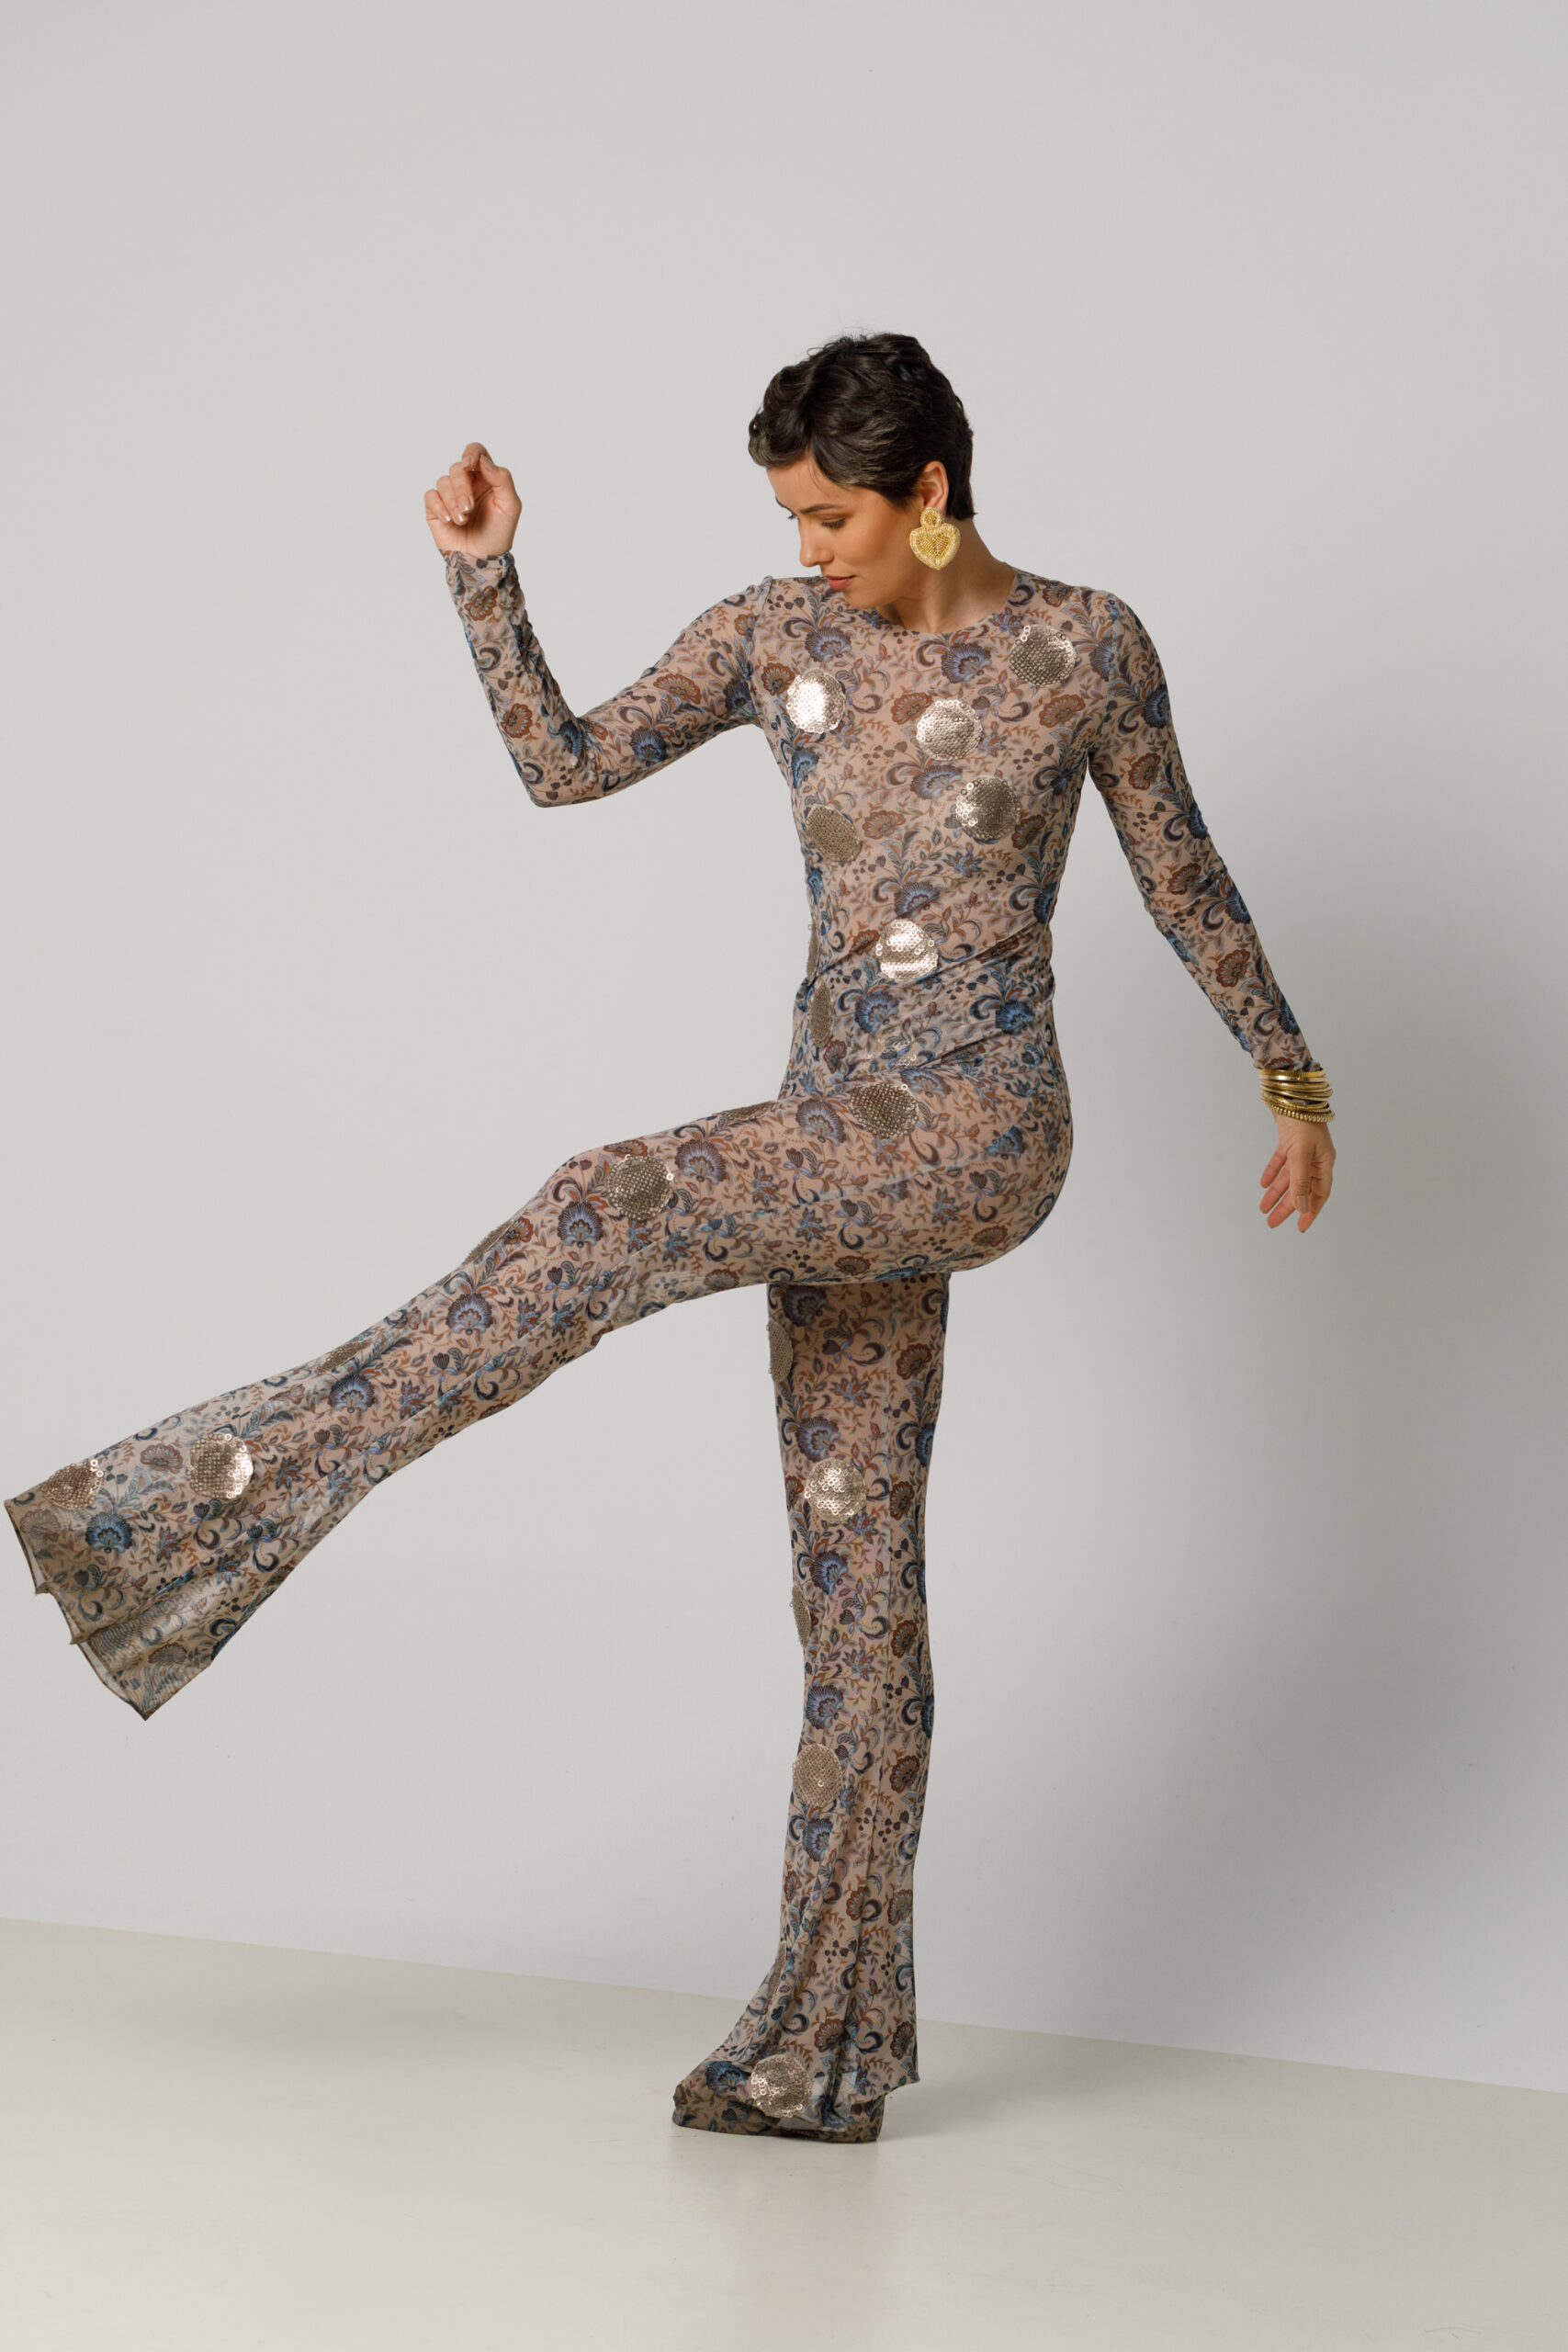 KIA Floral trousers in tulle and sequin appliqués. Natural fabrics, original design, handmade embroidery